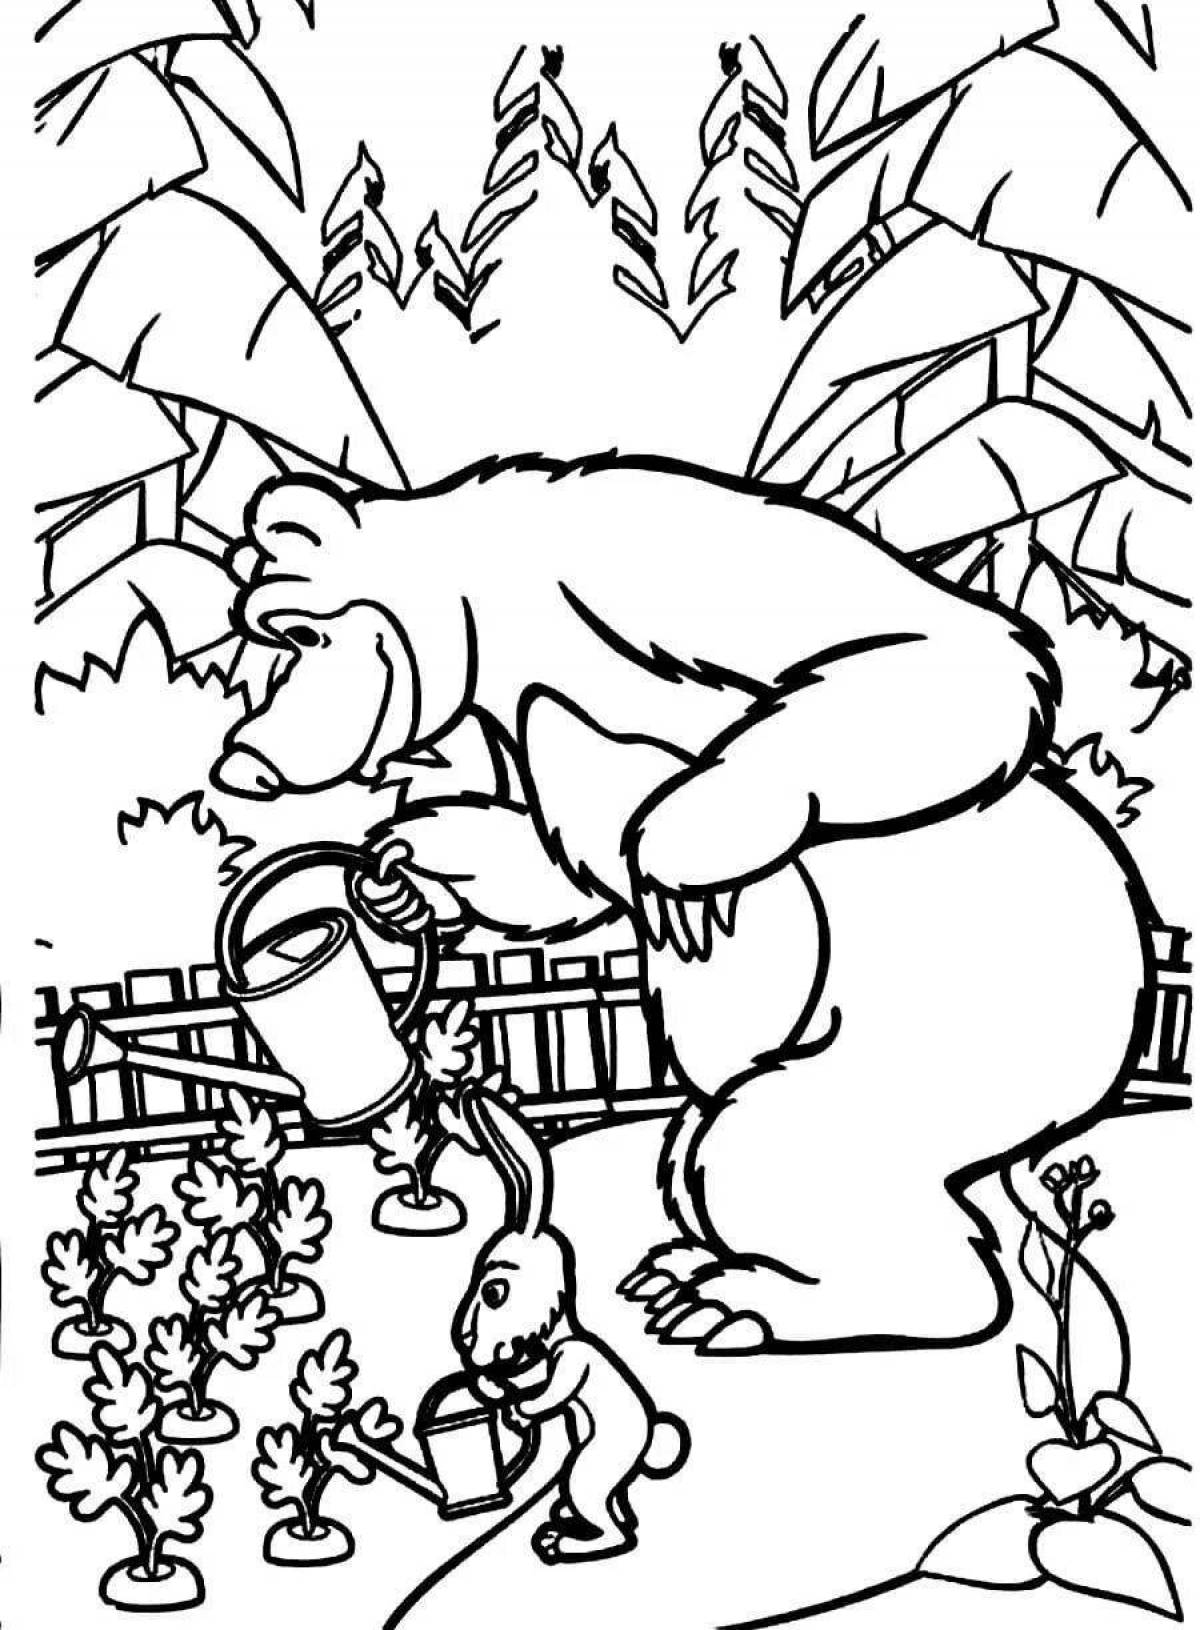 Blessed bear and hare coloring page